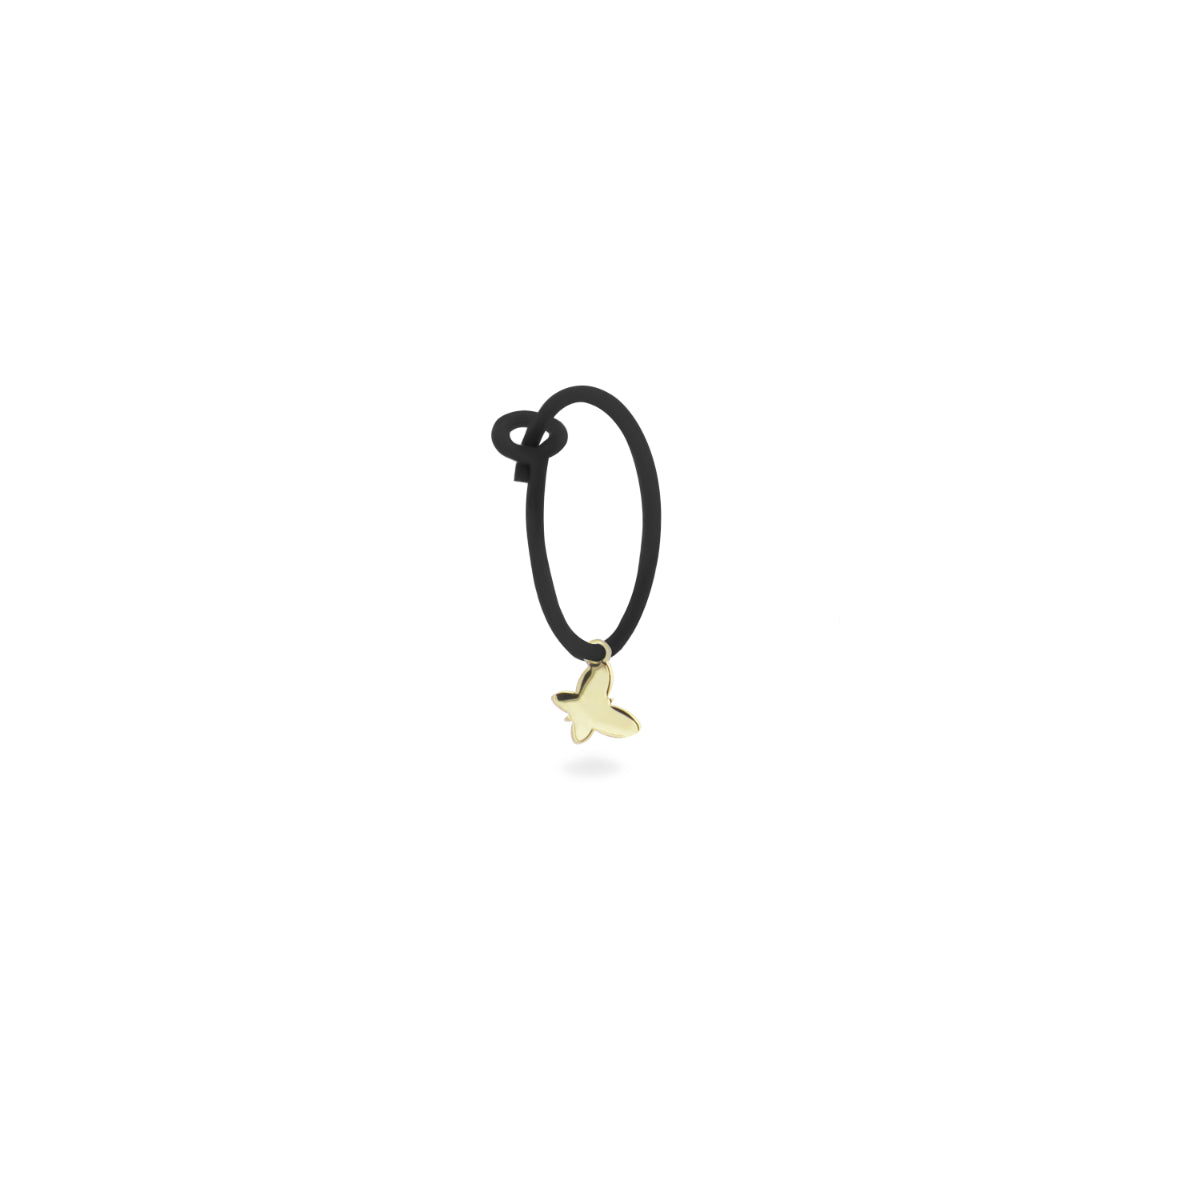 Earrings - Single earring with Butterfly and painted hoop - ORO18KT - 3 | Rue des Mille